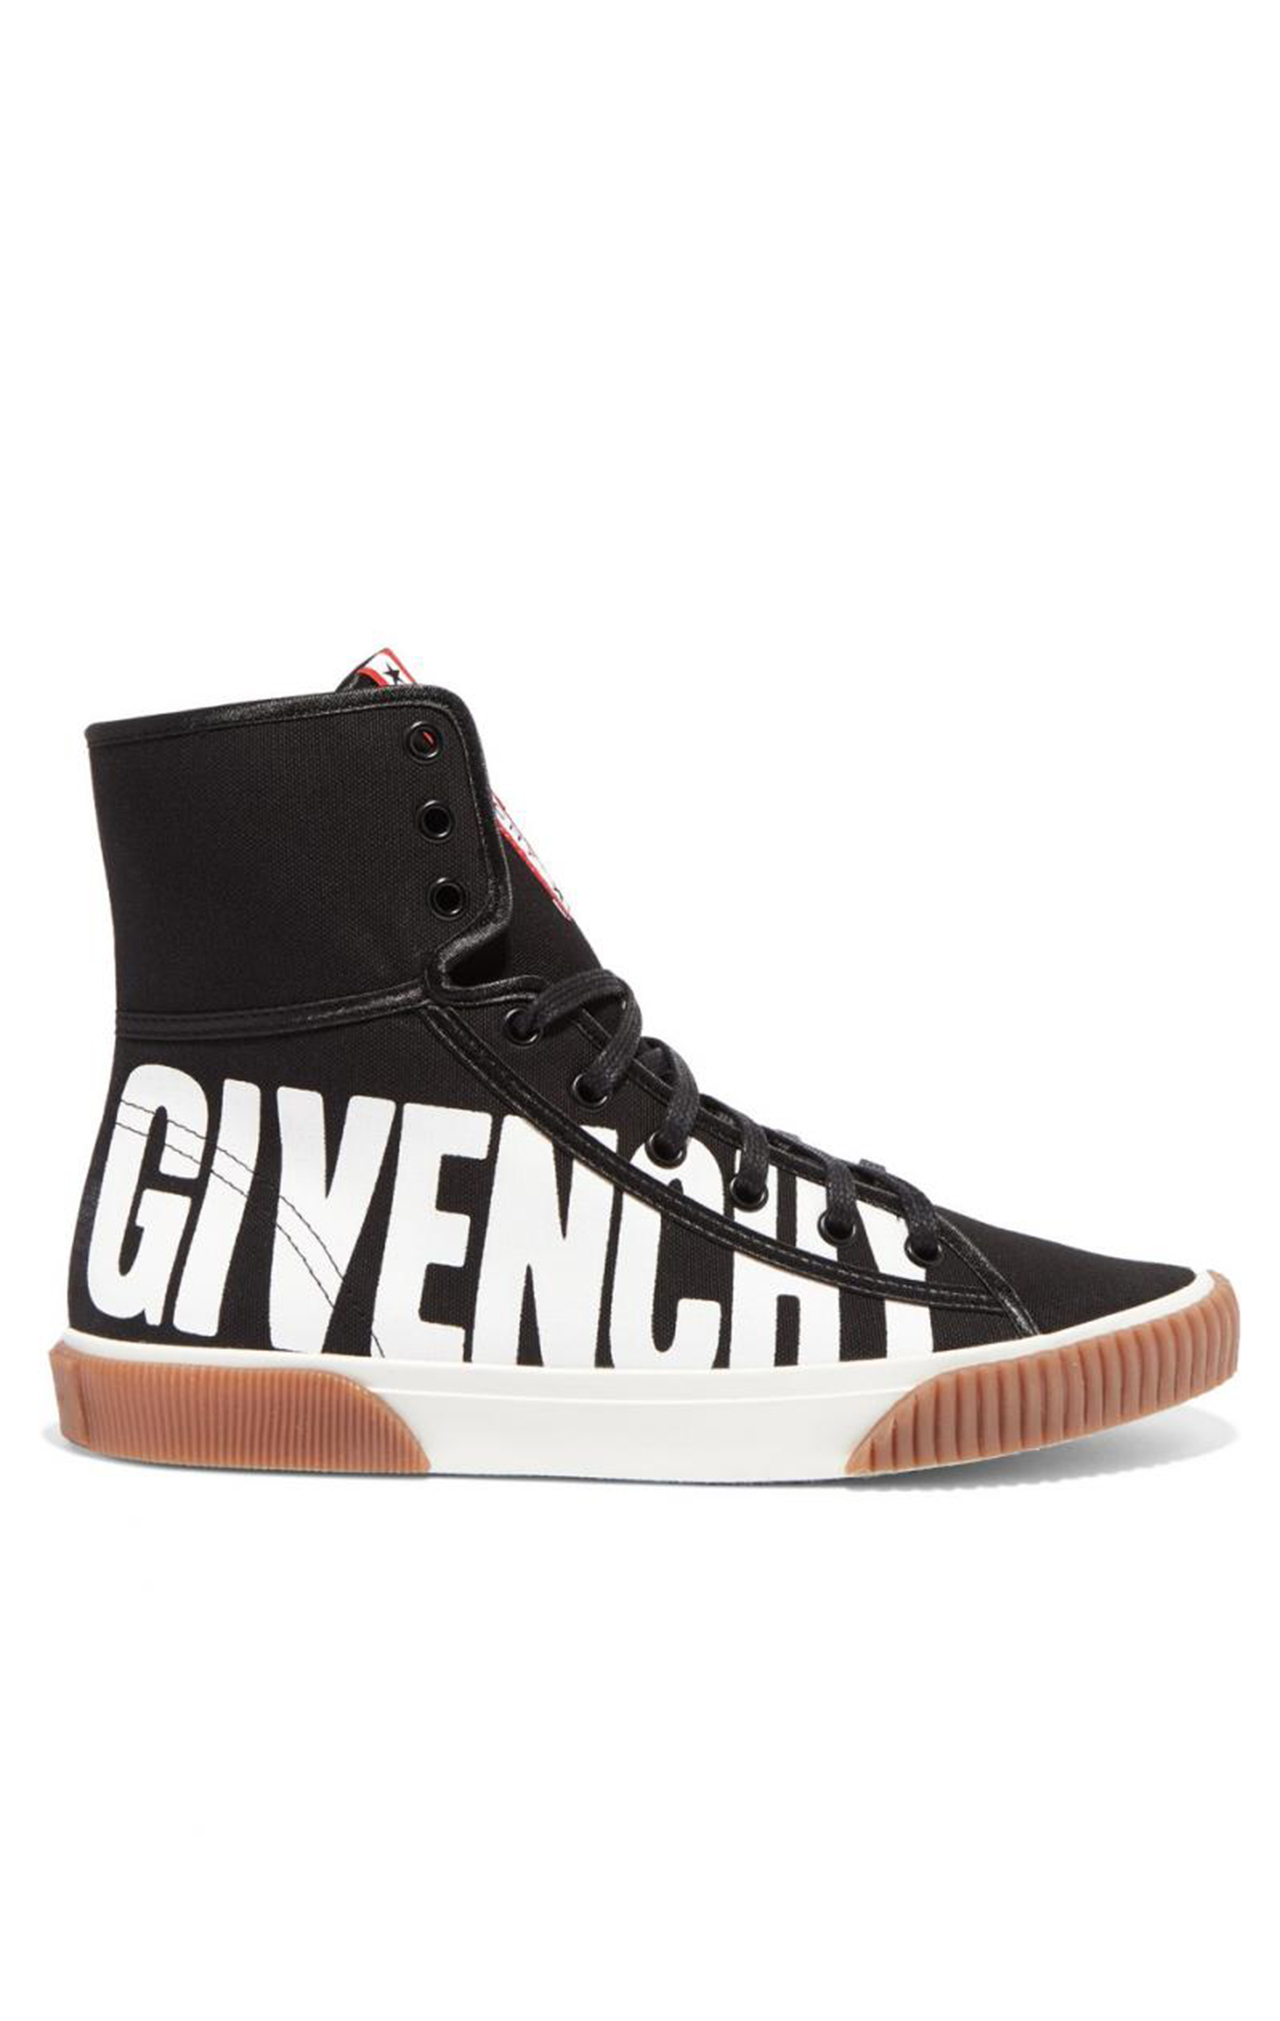 Givenchy, Sneakers